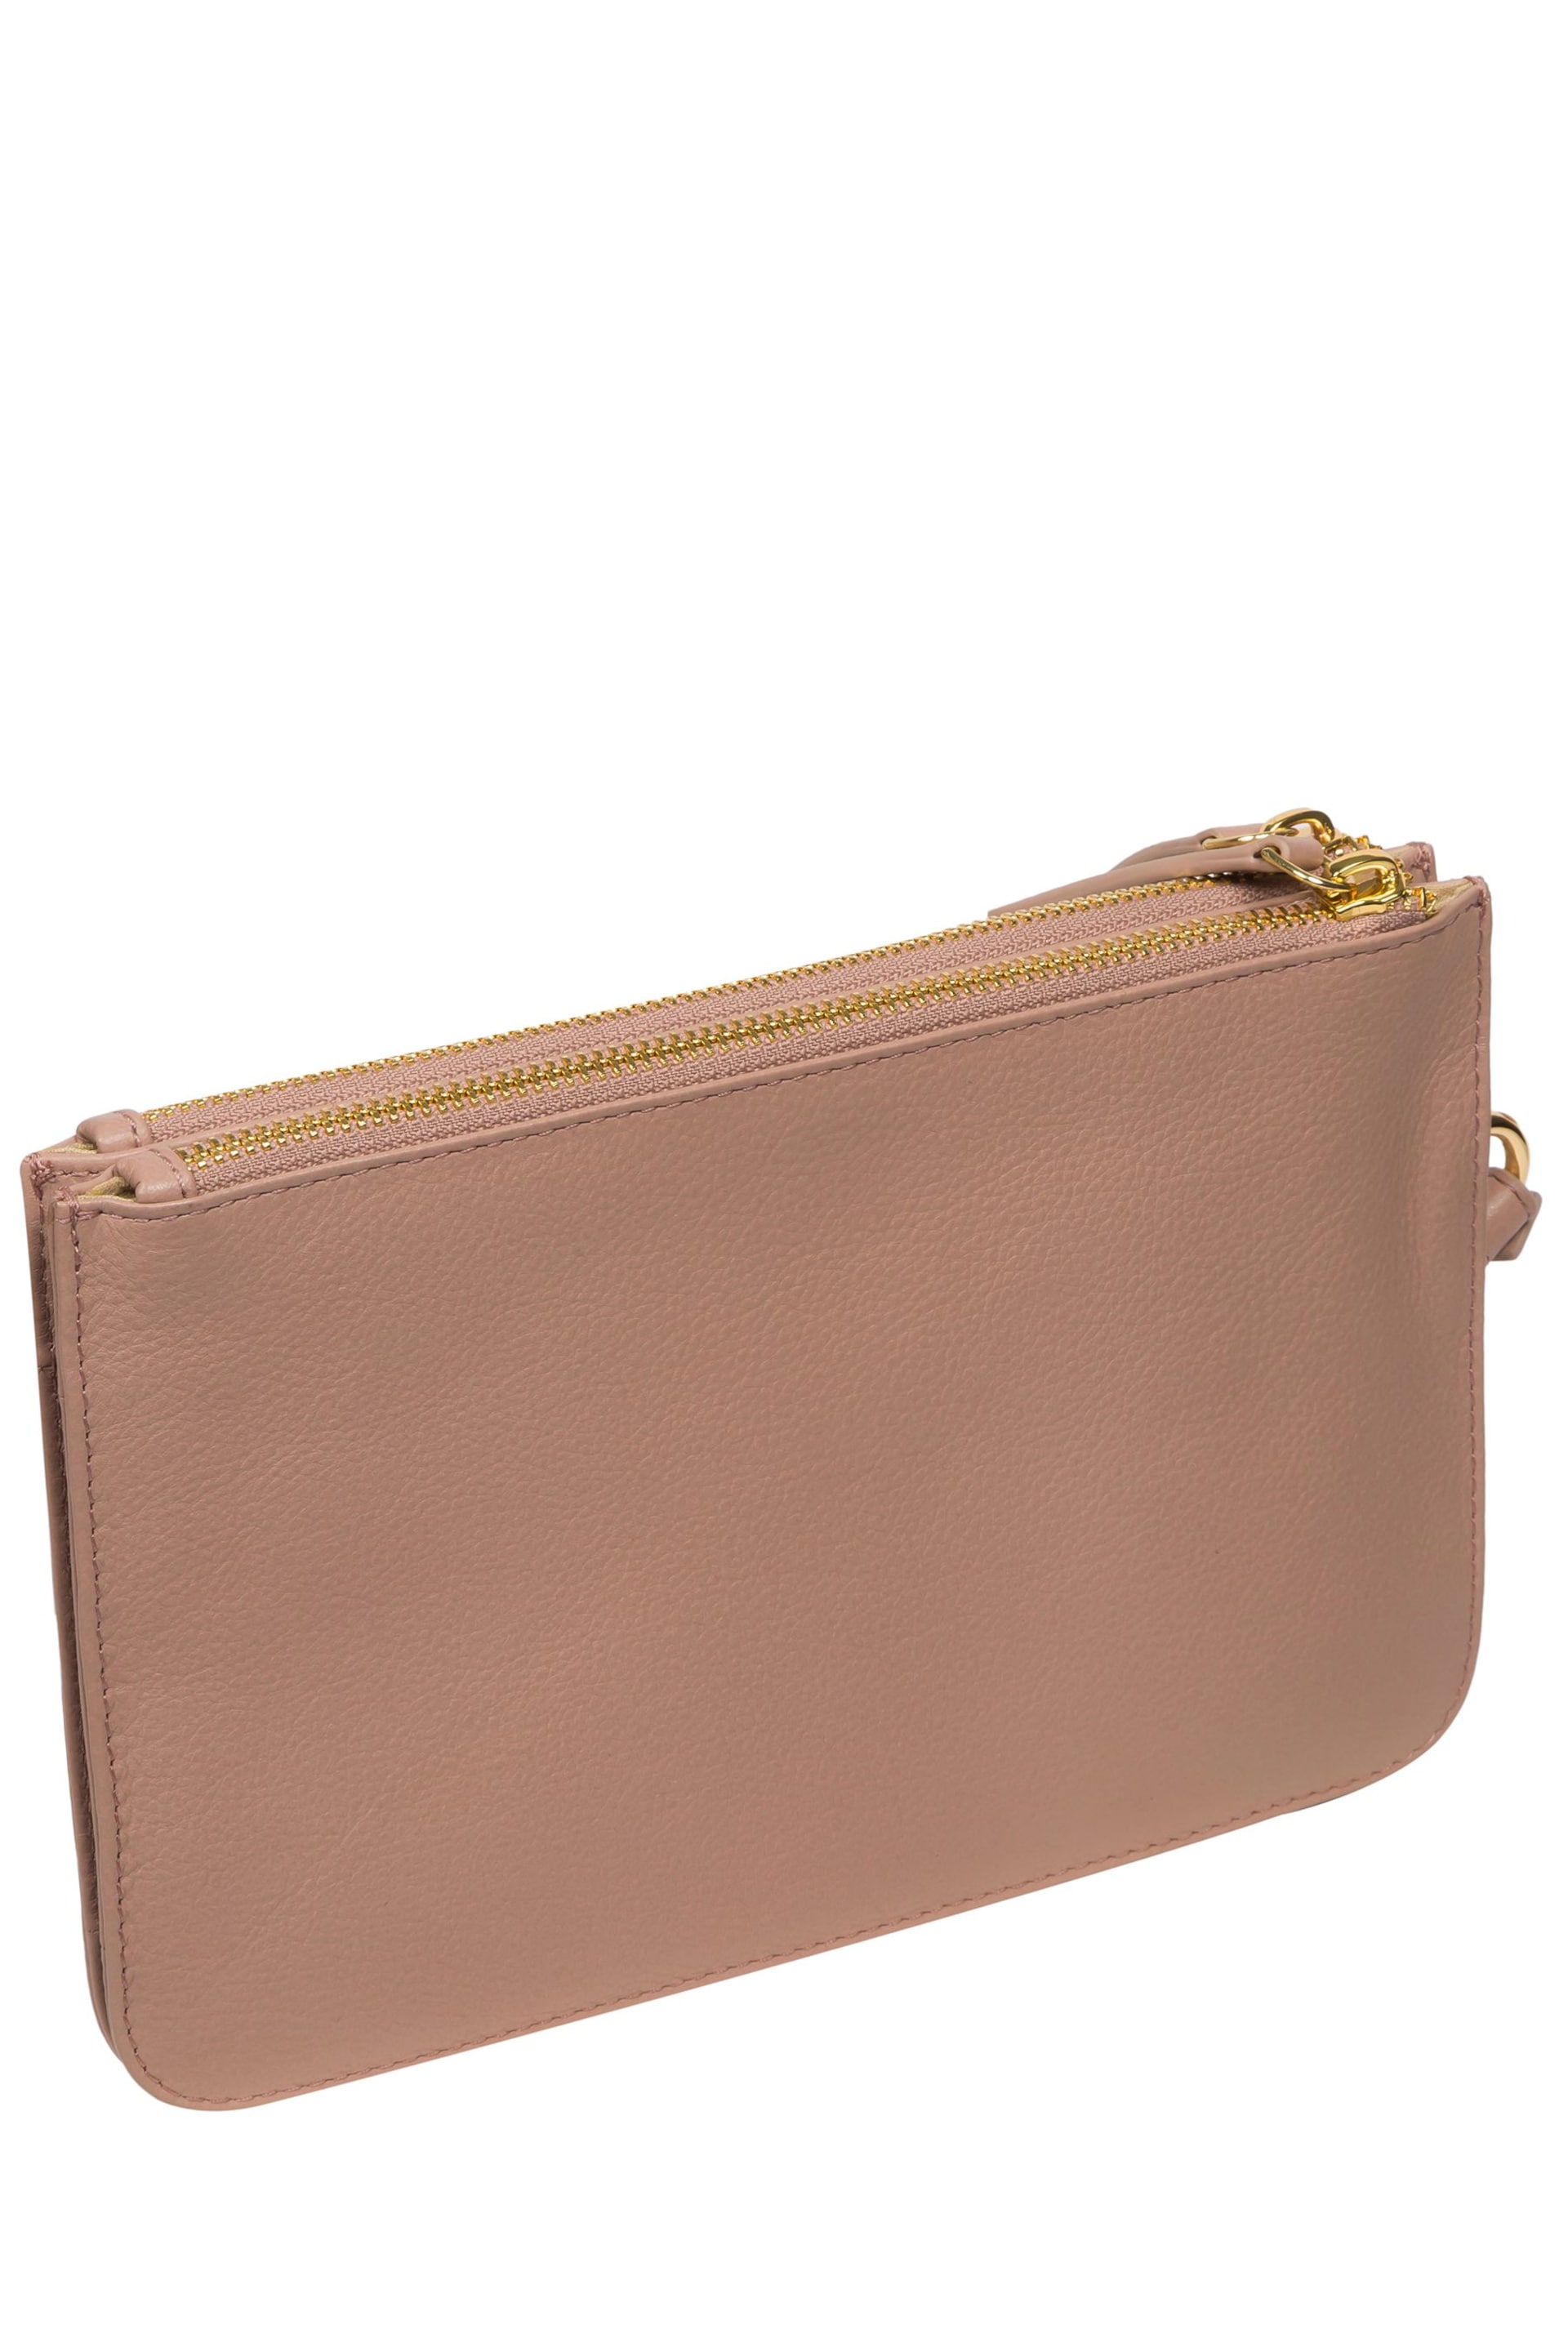 Pure Luxuries London Addison Nappa Leather Clutch Bag - Image 5 of 7